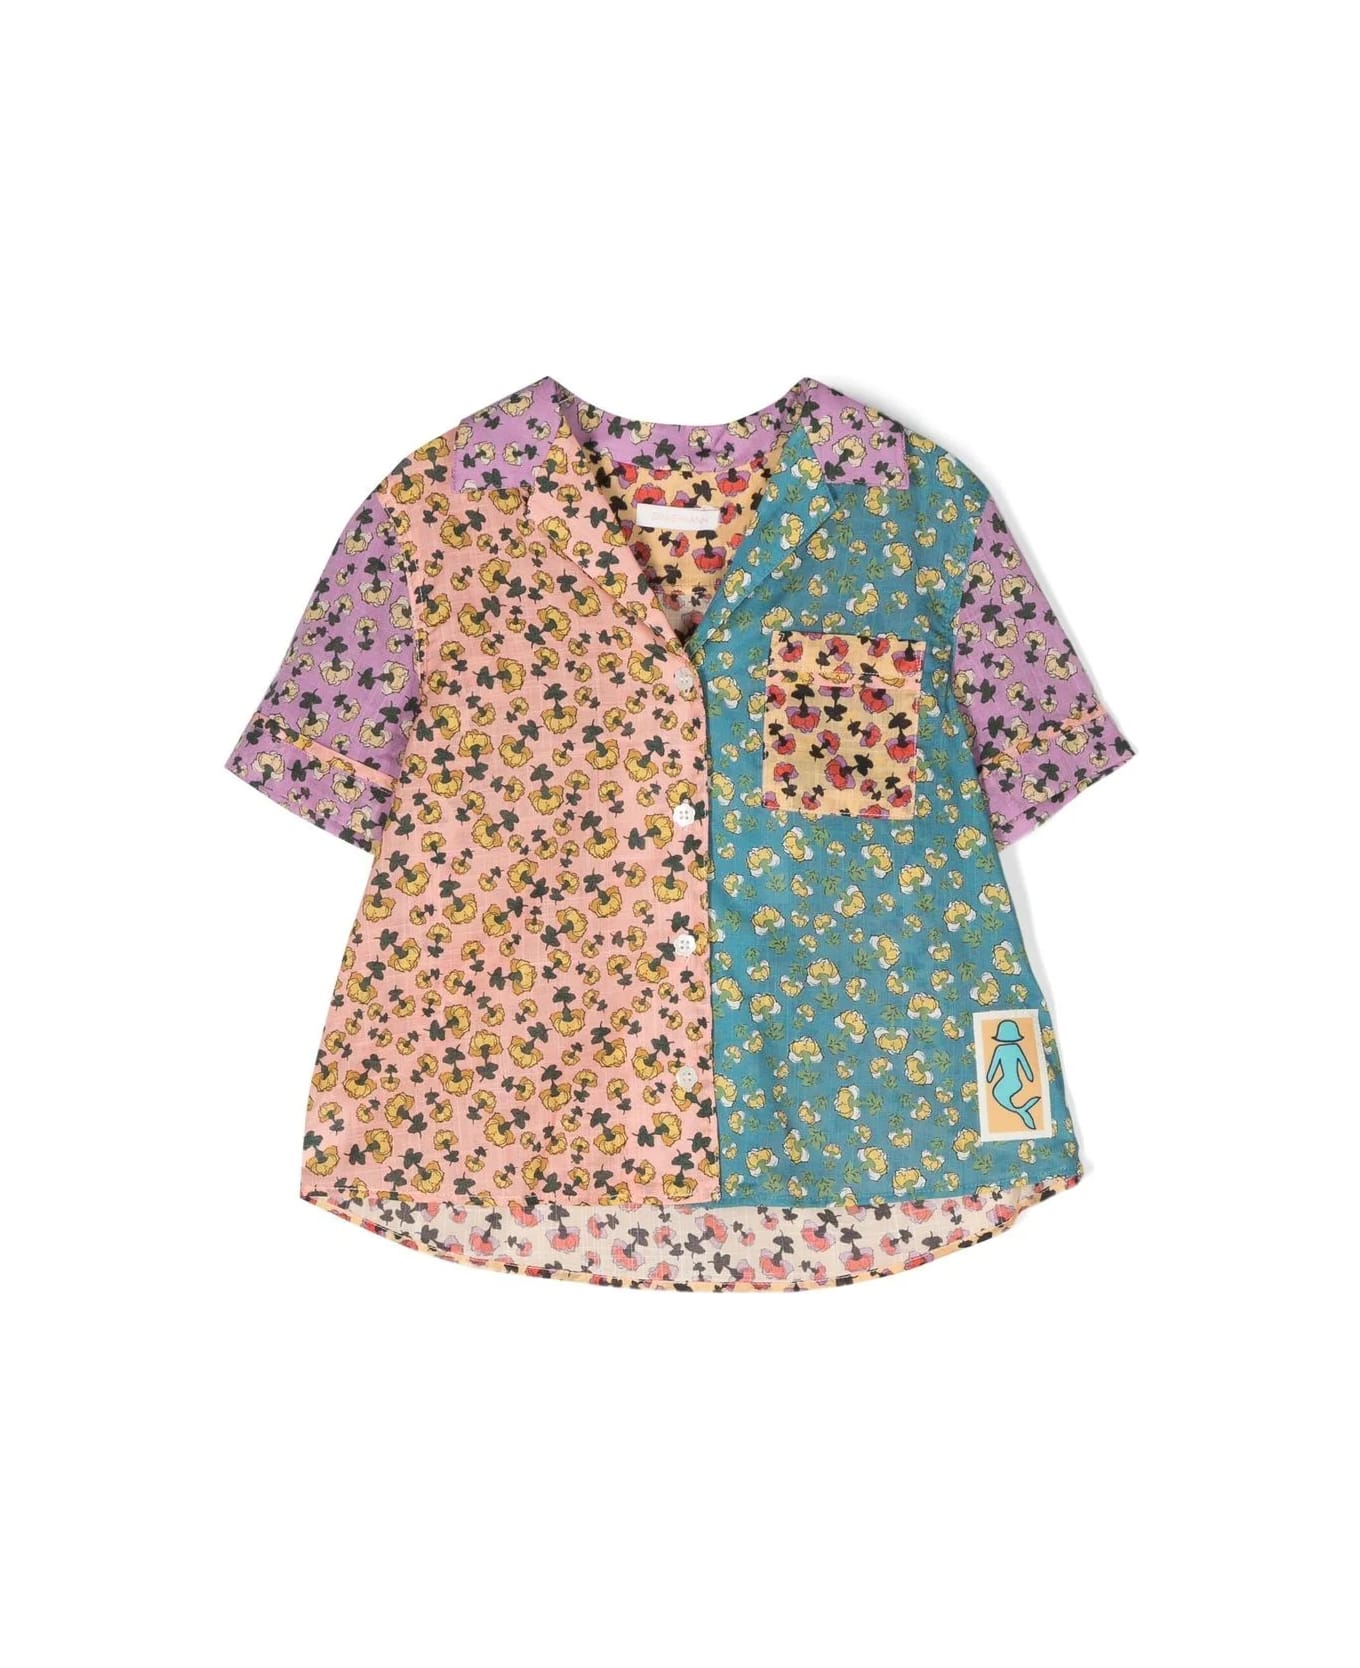 Zimmermann Shirt With Print - Multicolor シャツ